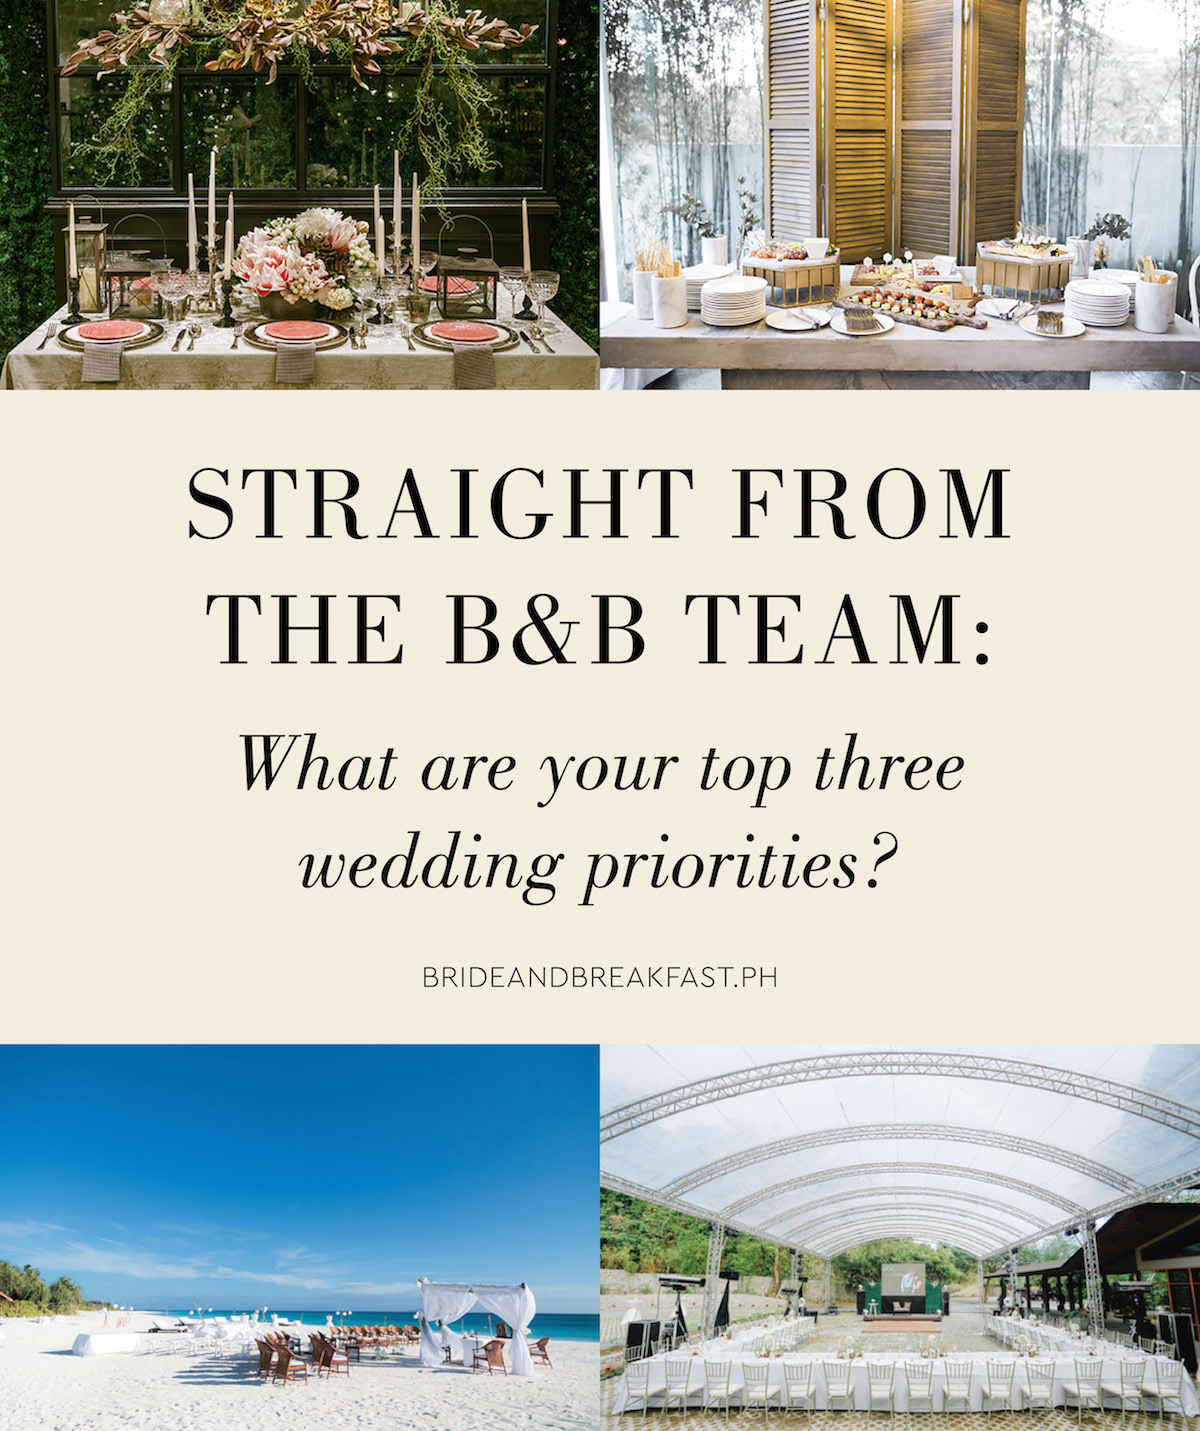 Straight From the B&B Team: What are your top three wedding priorities?